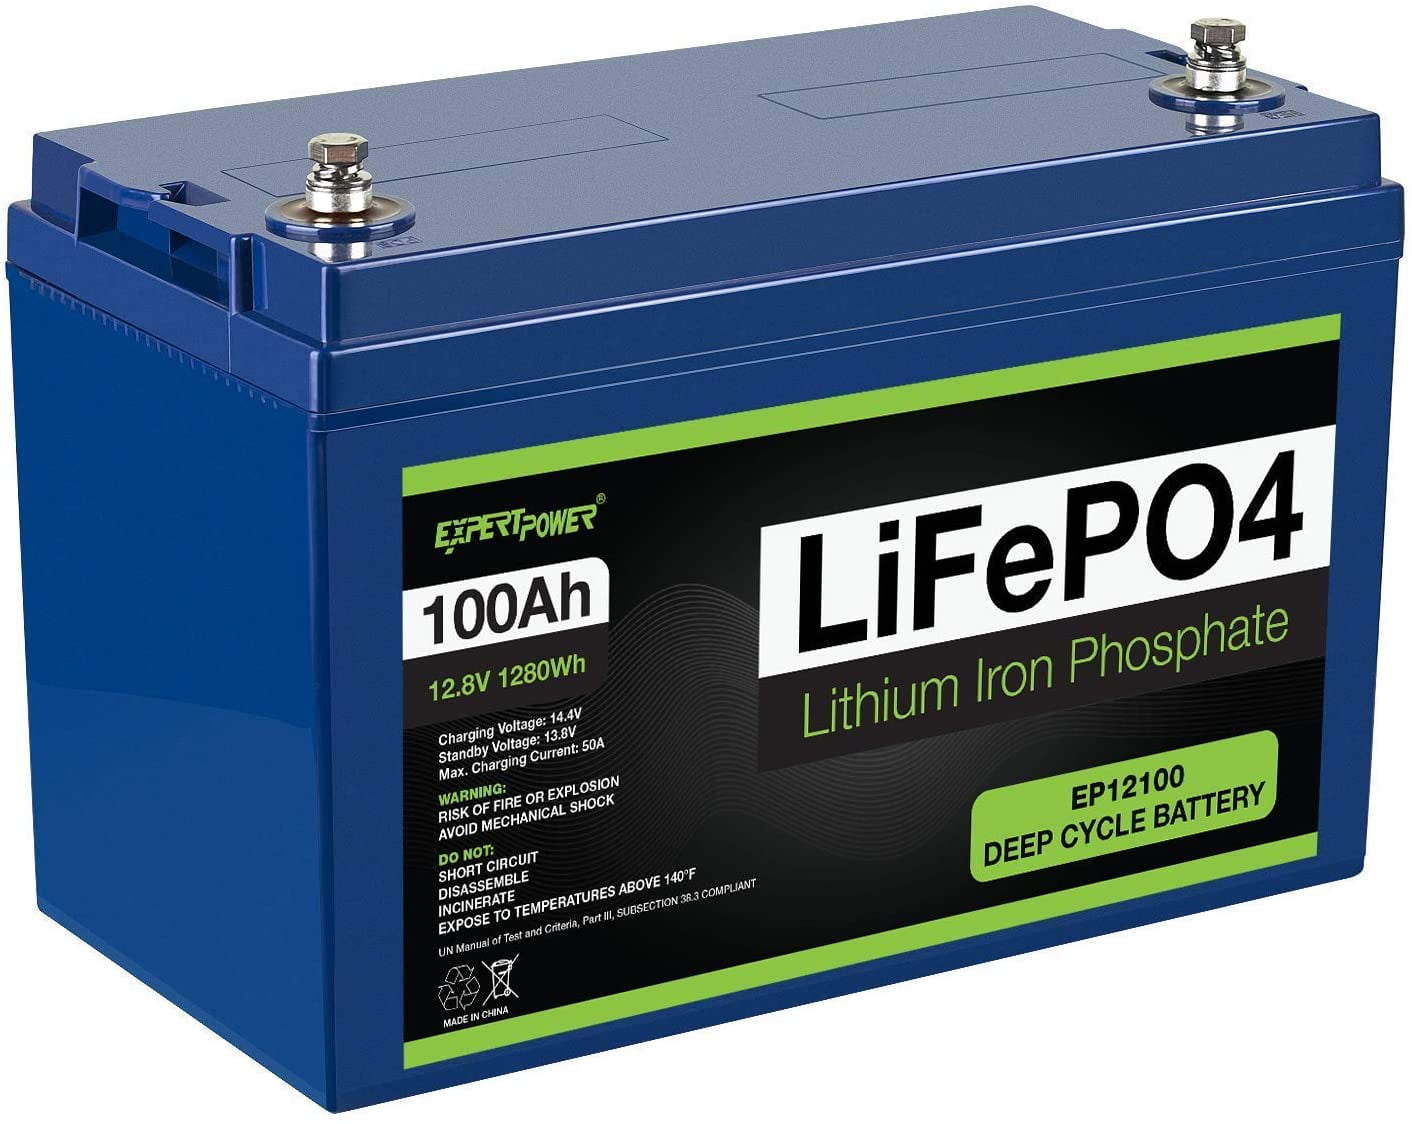 RV 12V 12Ah Deep Cycle LiFePO4 Battery Roypow 12 volt Rechargeable Lithium Iron Phosphate Battery with low-temperature cut-off 3500~8000 Cycles for Kid Scooters Solar System Fish Finder 